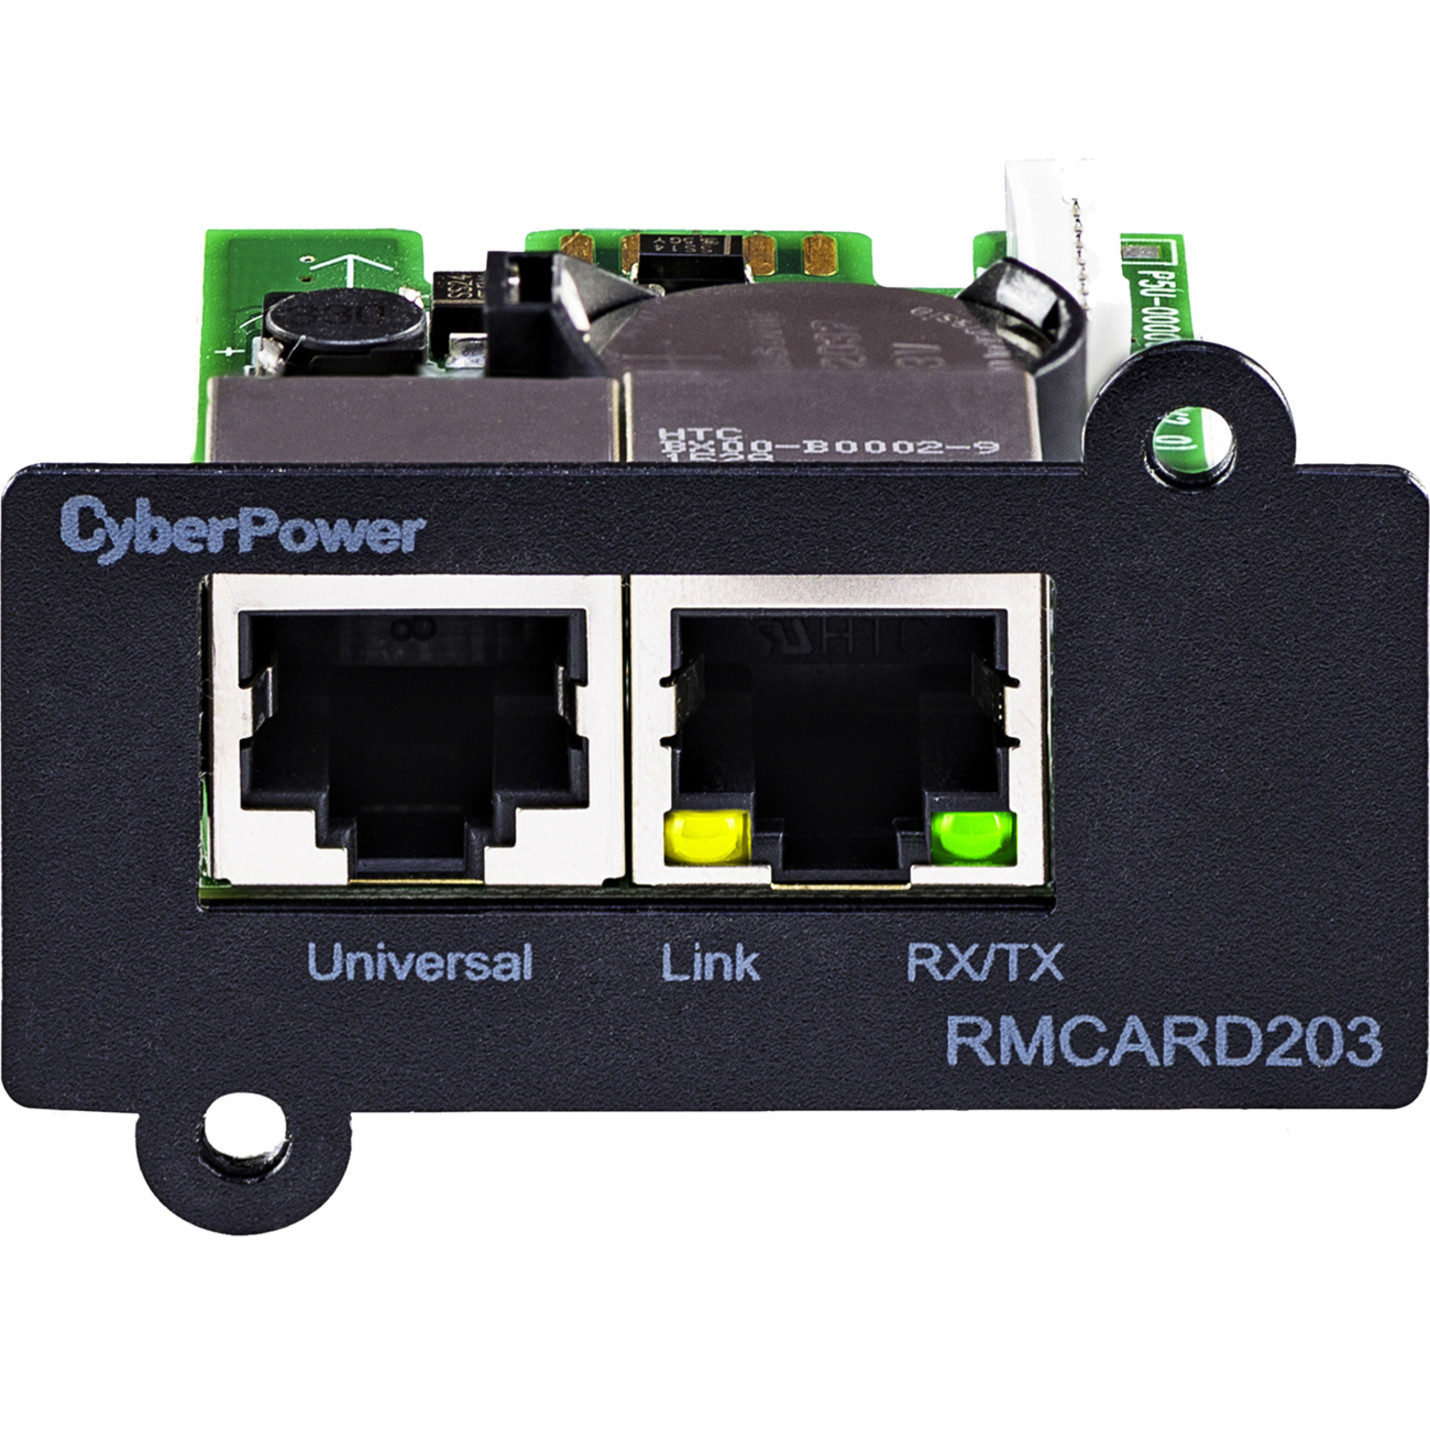 Cyber Power RMCARD203 Remote Management CardSNMP/HTTP/NMS and ENVIROSENSOR Port1 x Network (RJ-45) Port RMCARD203